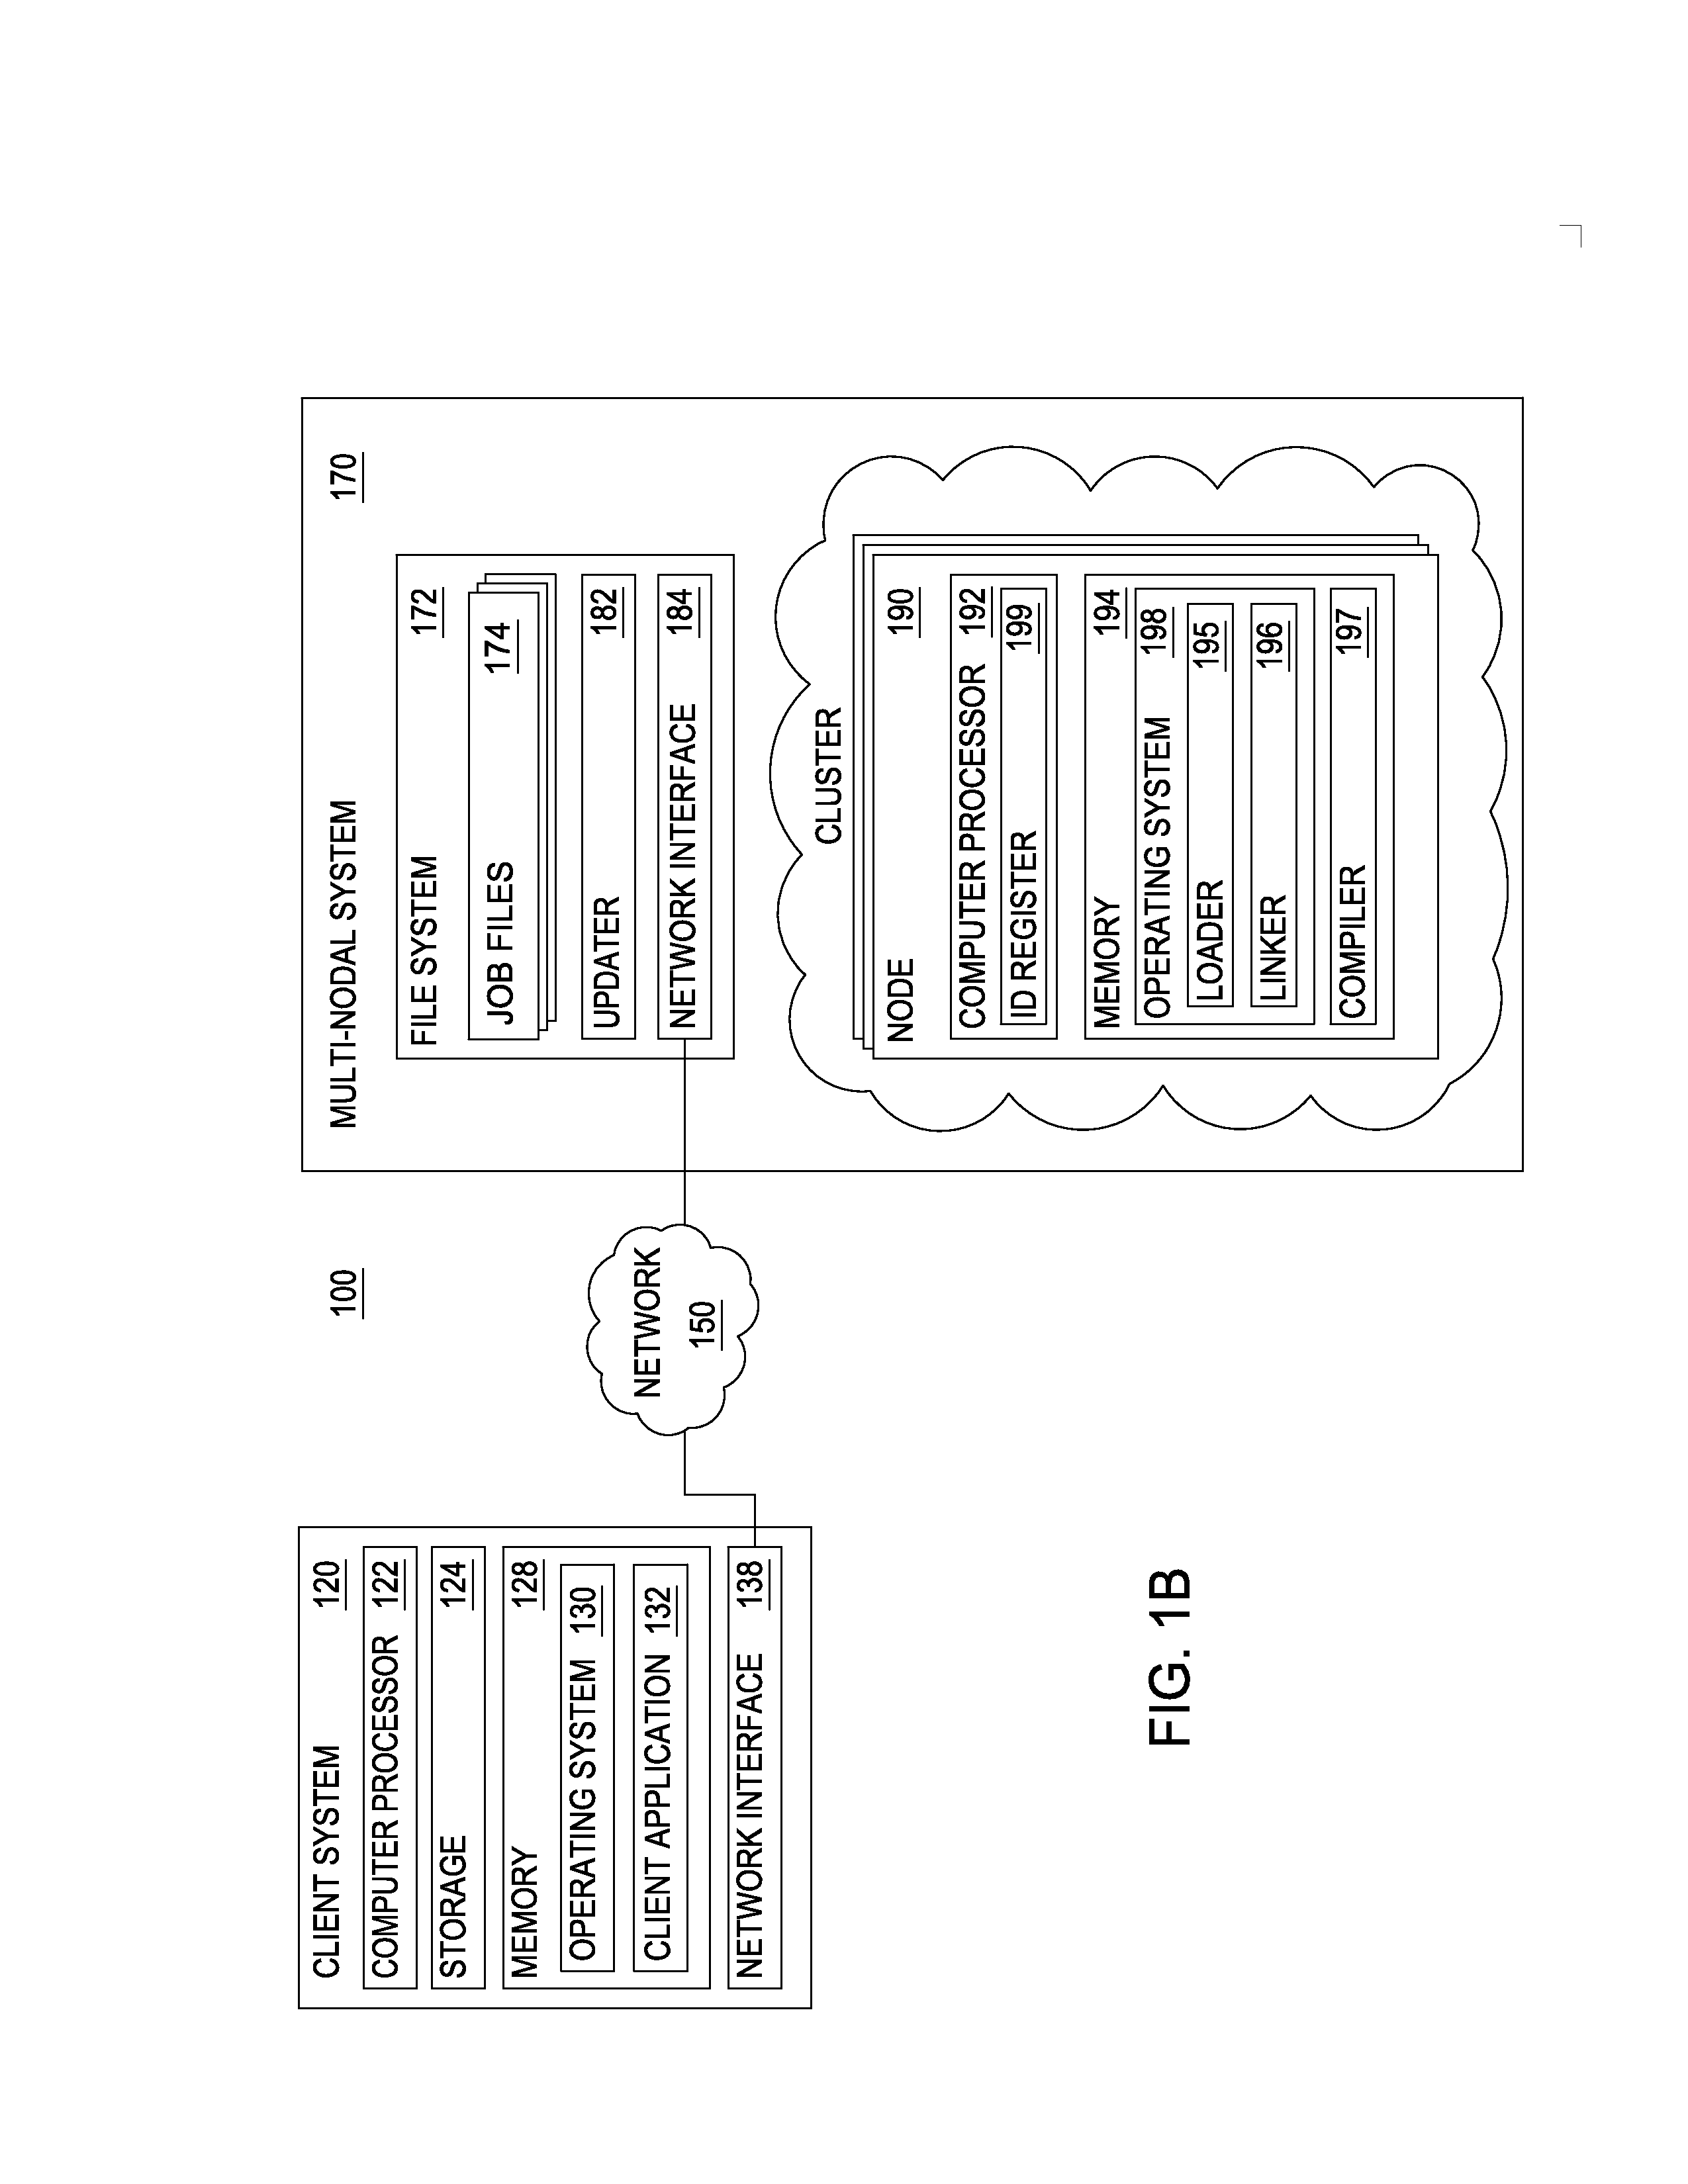 Providing performance tuned versions of compiled code to a CPU in a system of heterogeneous cores